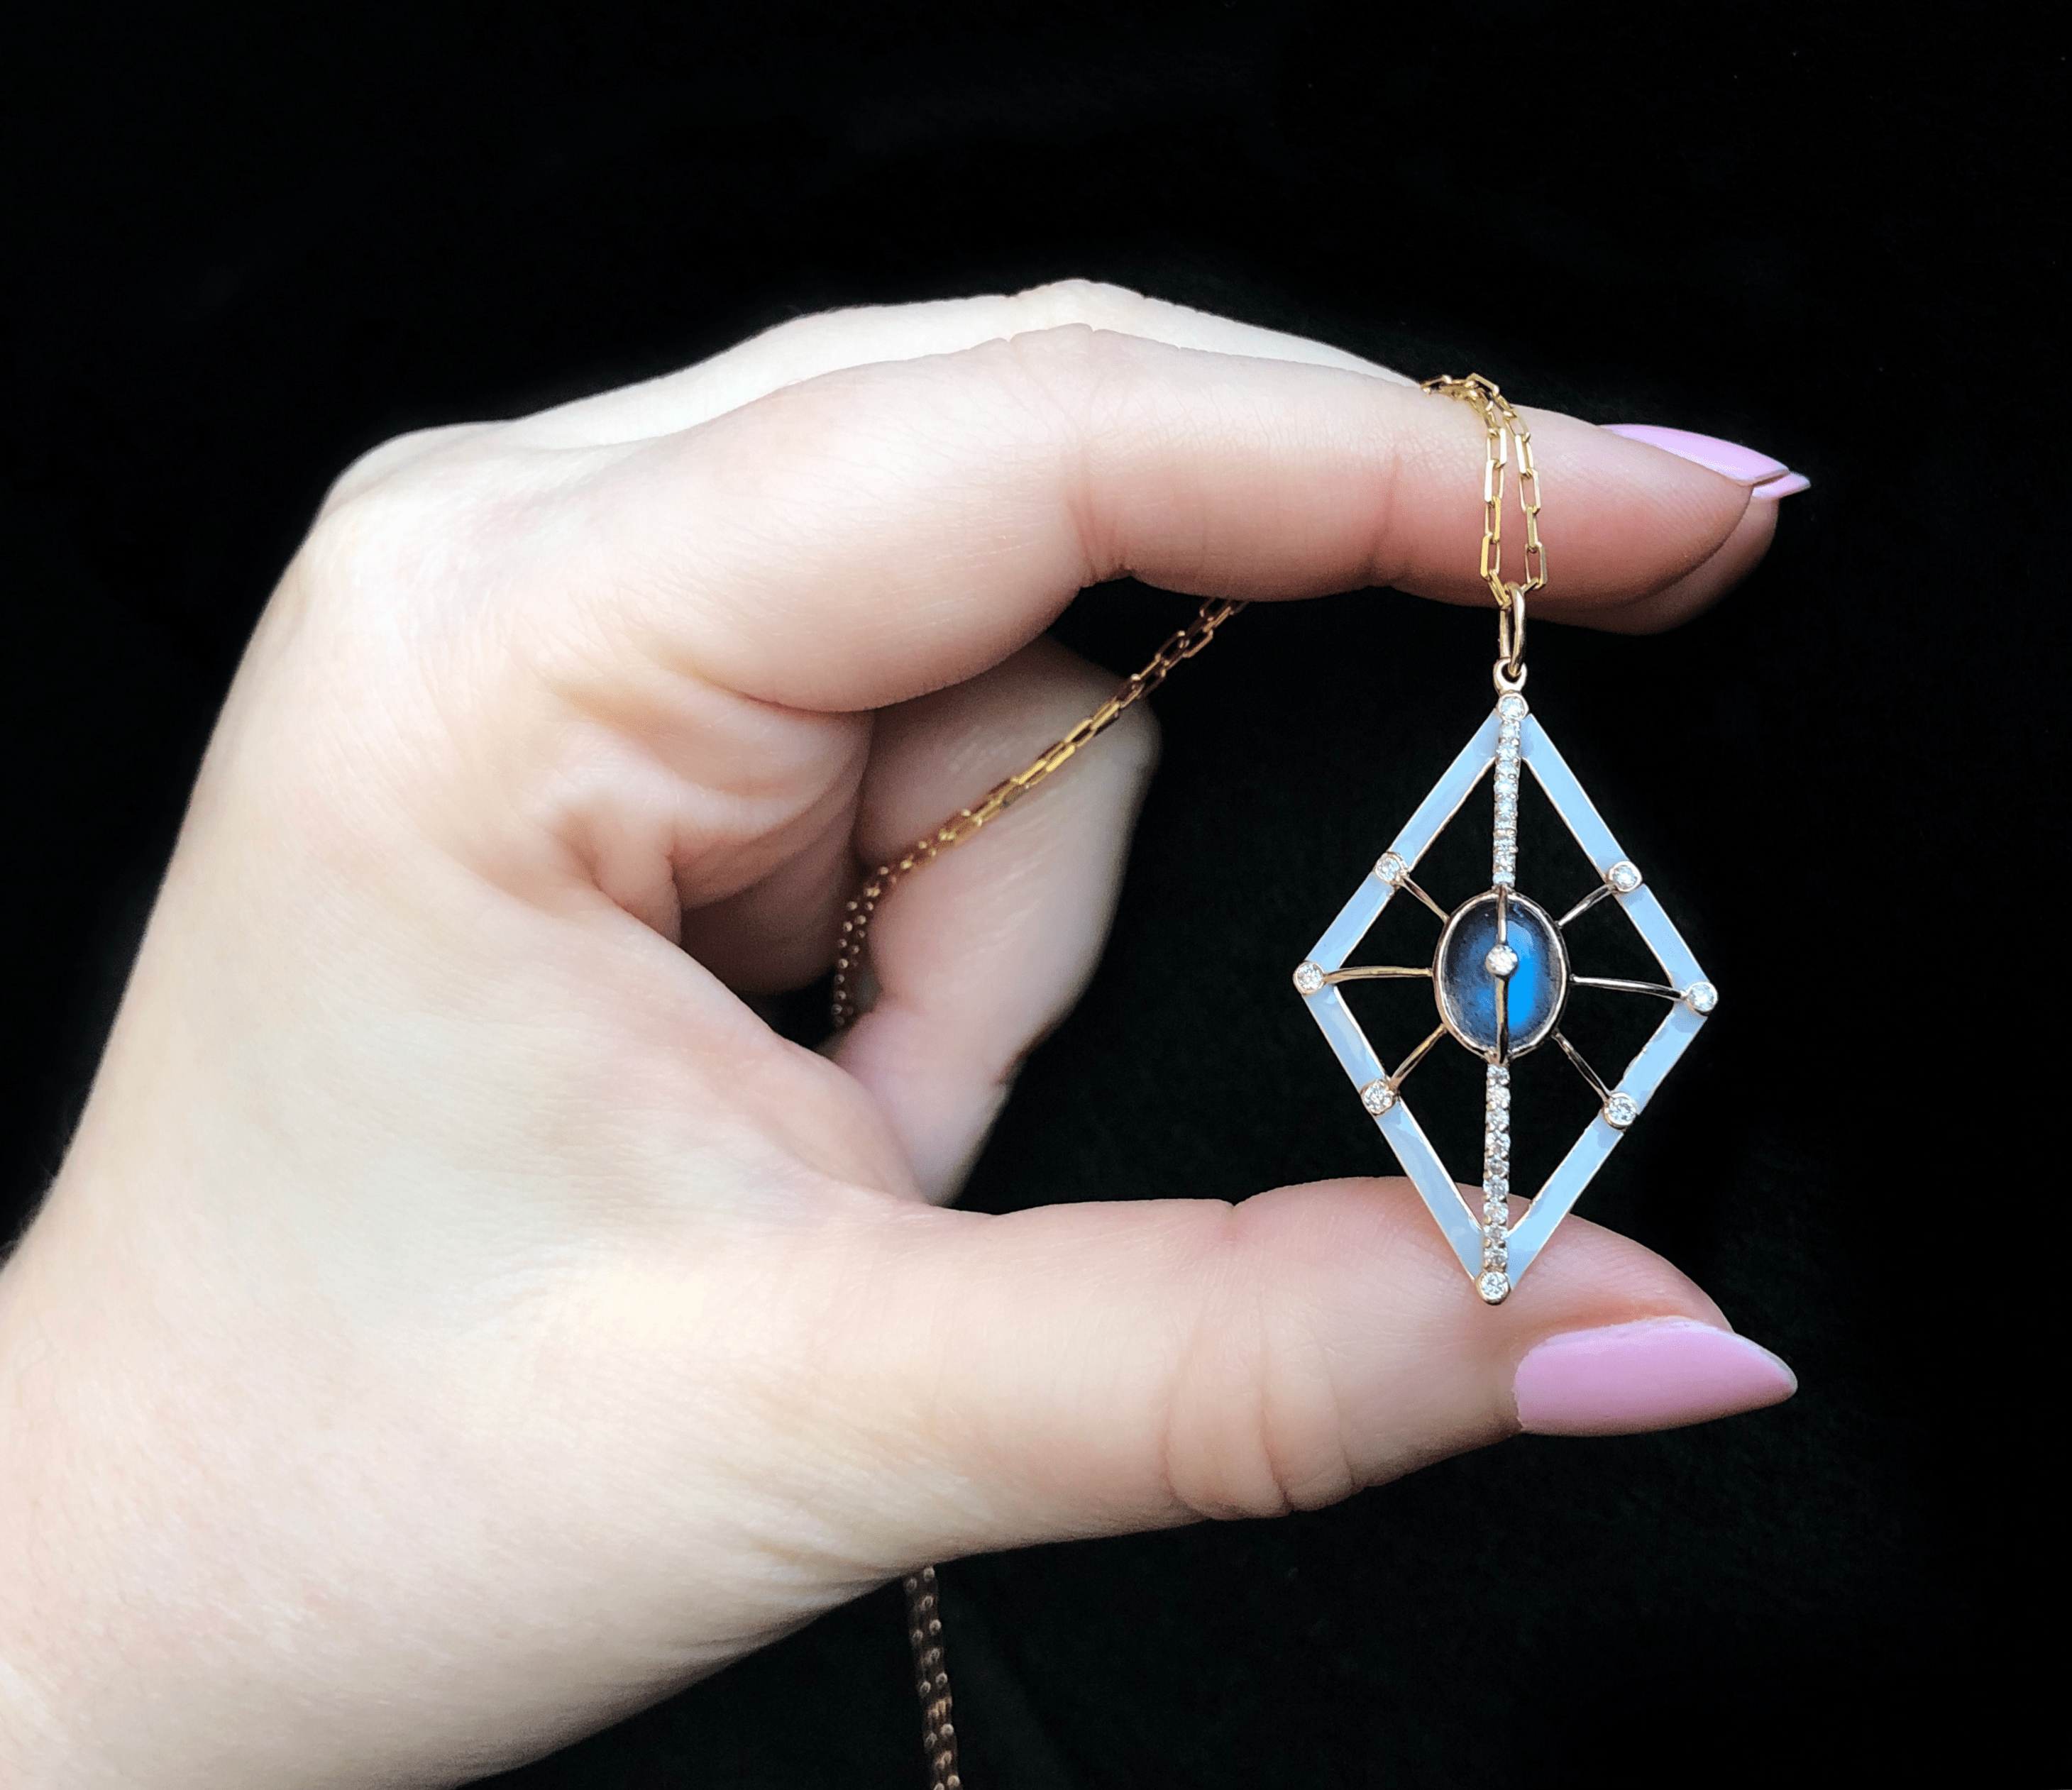 This pendant is so pretty! Necklace from Loriann Jewelry's Galaxy collection, with diamonds, labradorite, and enamel.